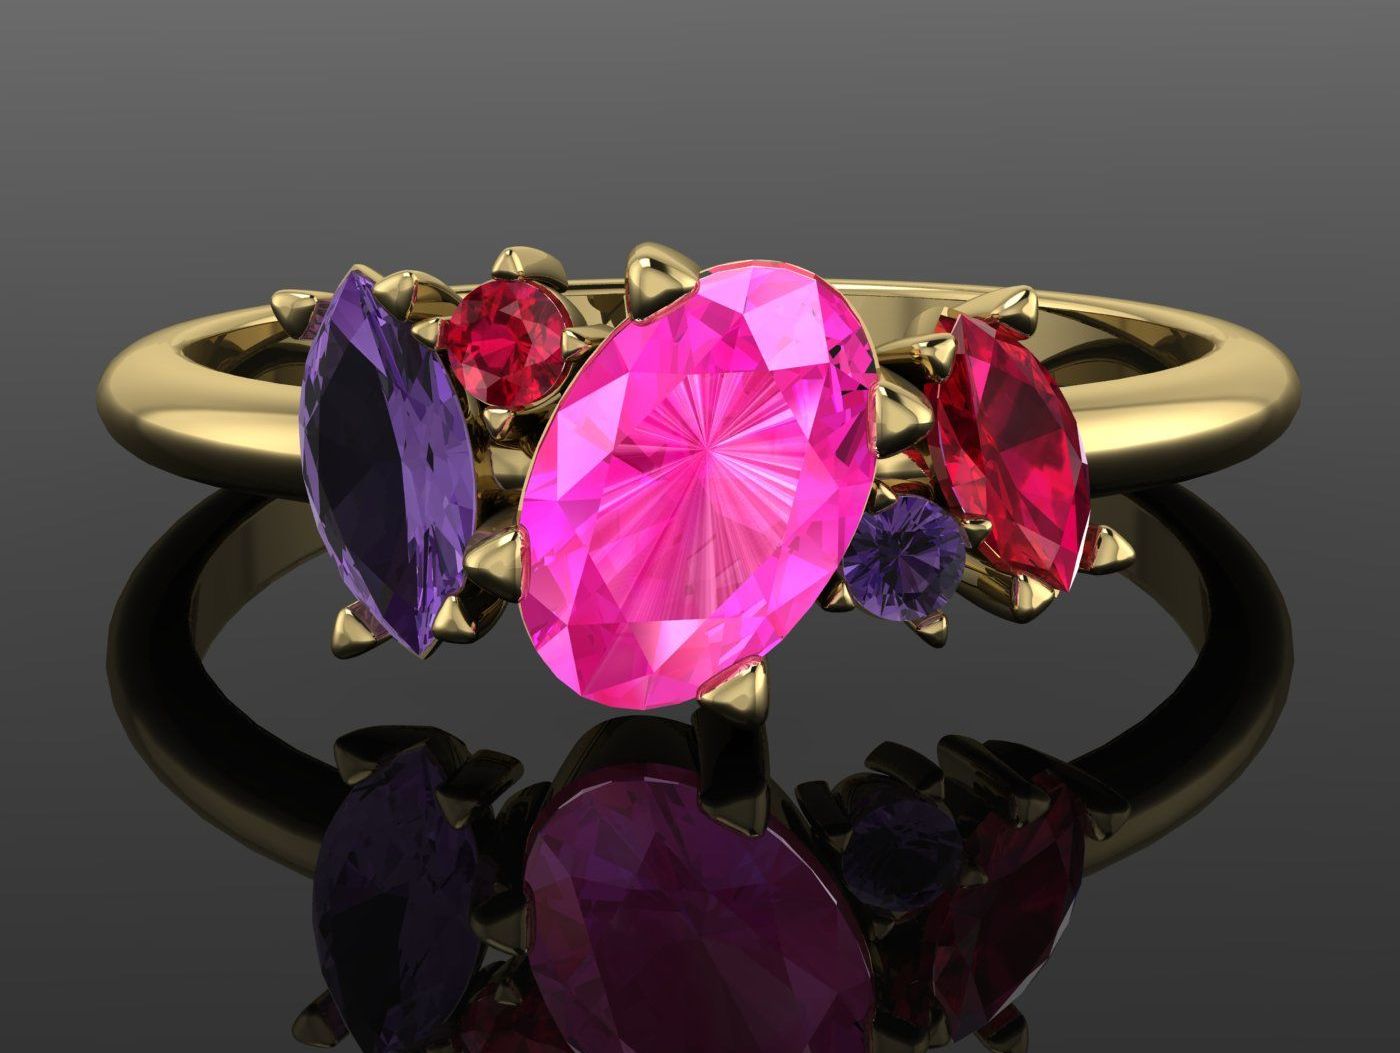 Unique & unusual asymmetrical gemstone engagement ring featuring exquisite purple and pink sapphires and ruby's